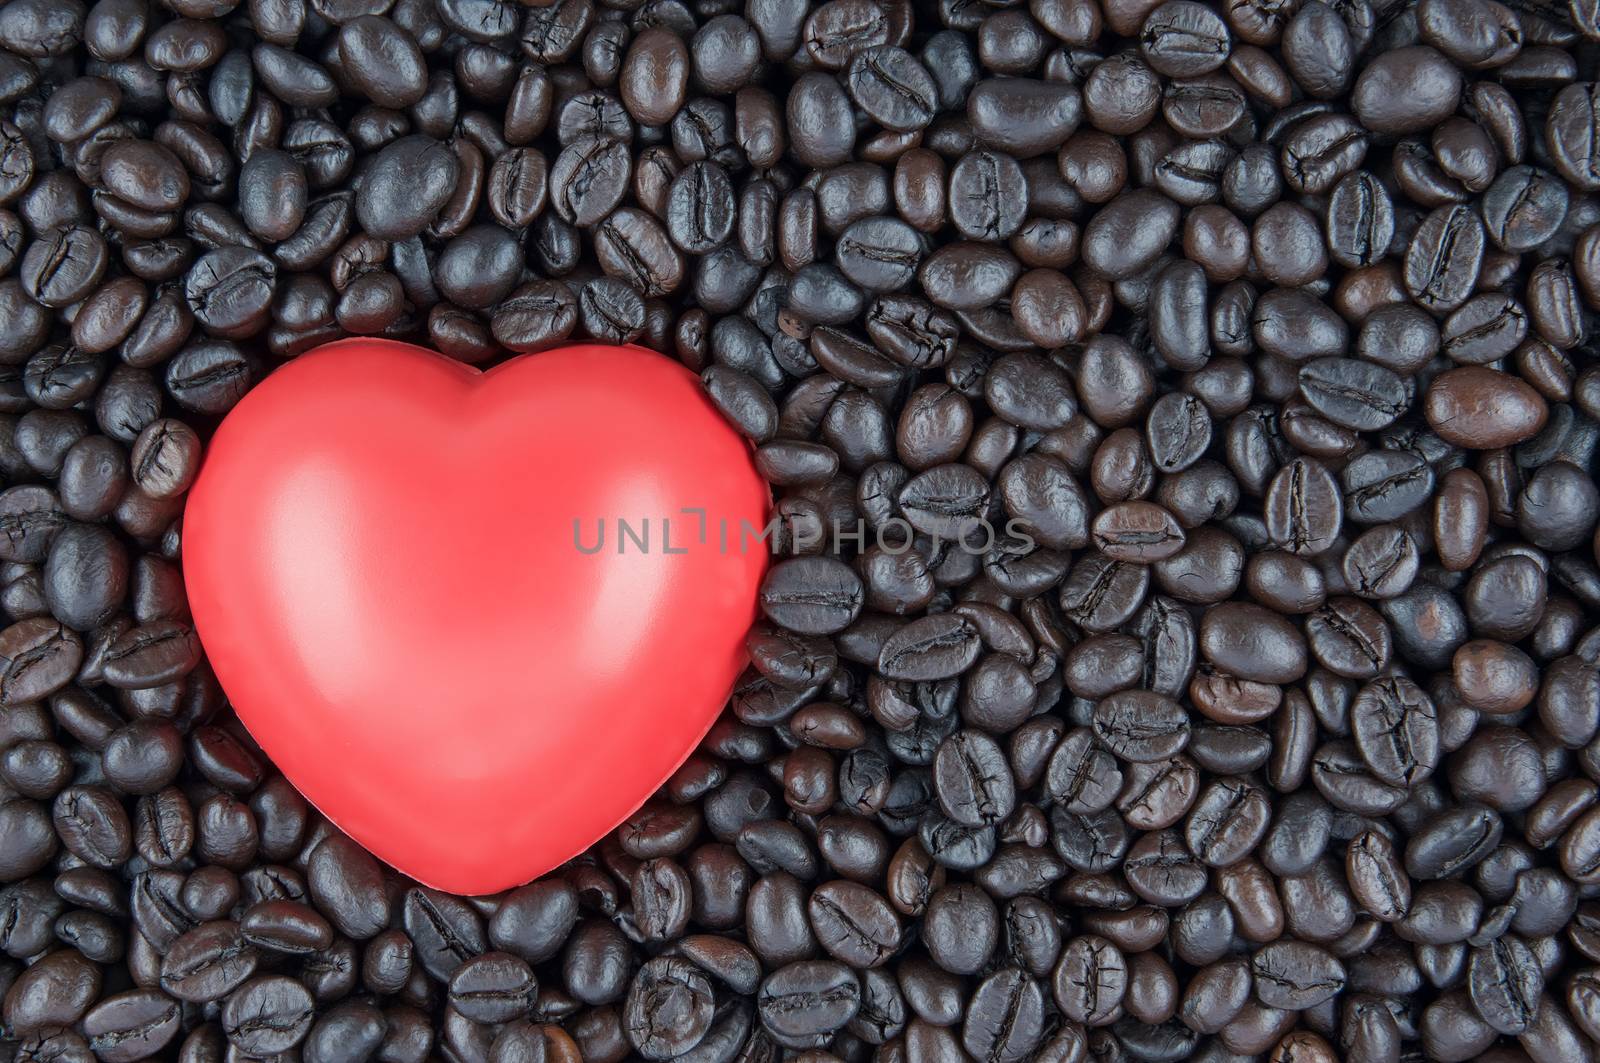 Red heart shape place on black roasted coffee beans use as texture or background.